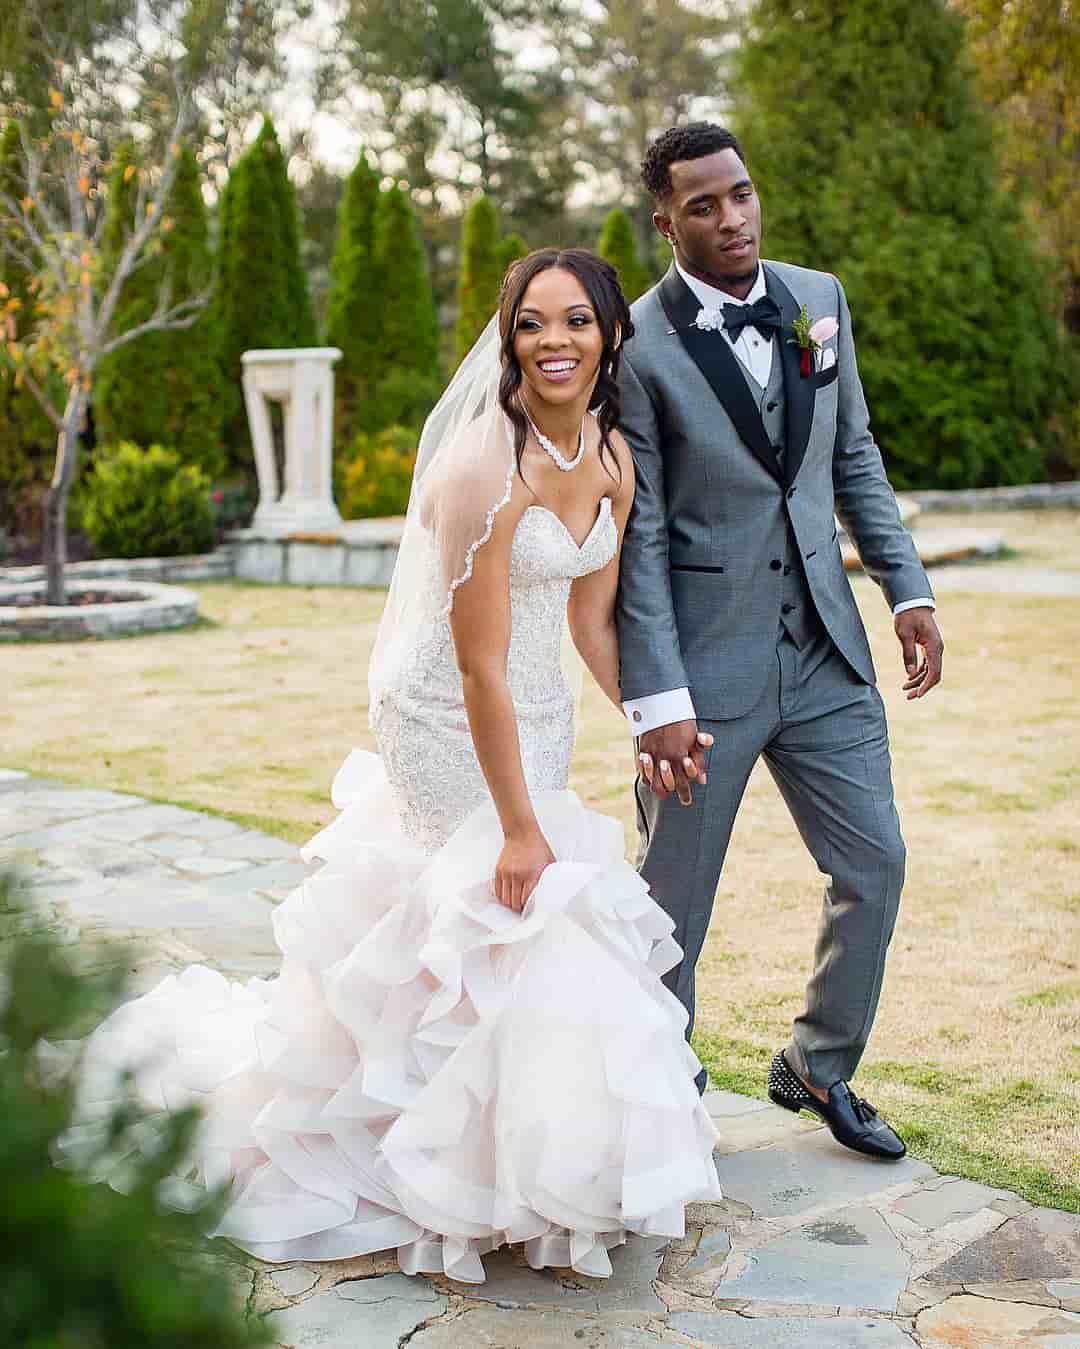 Image of Tim Anderson with his wife, Bria Anderson